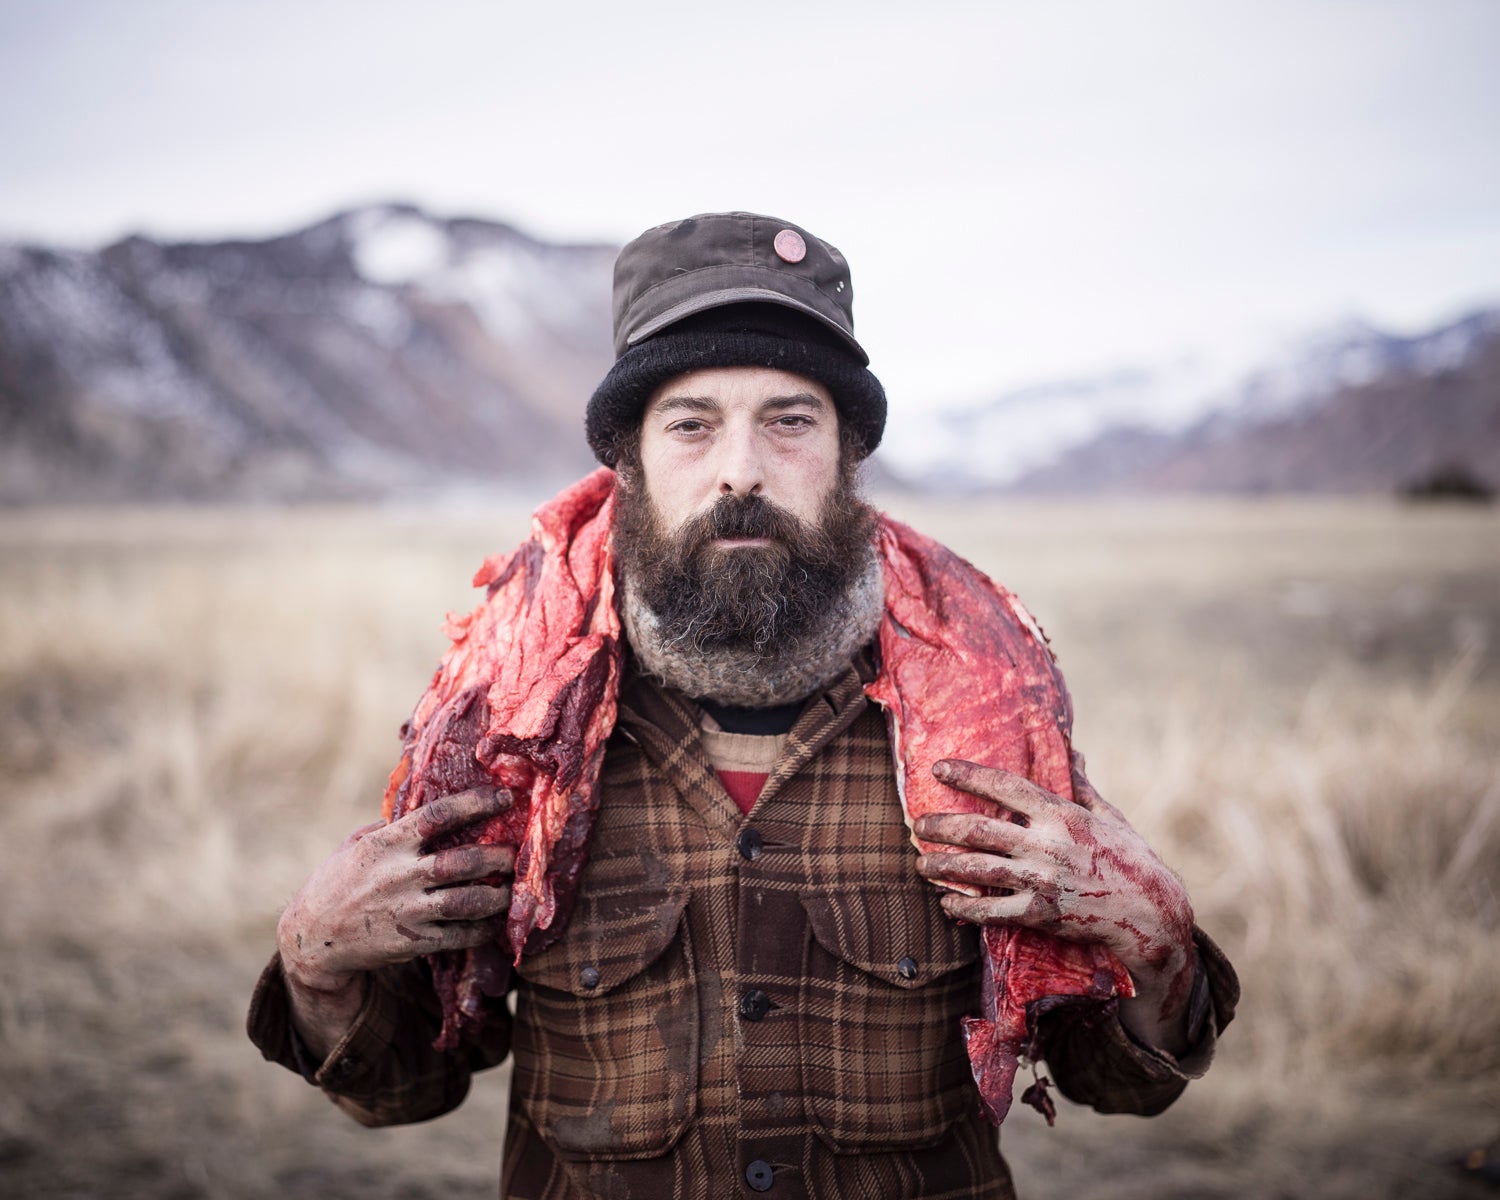 "The image of Josh carrying the buffalo backstrap over his neck is one of my favourites," says Hamon. "It¹s simple and graphic. As a portrait photographer it also has that primary aspect"